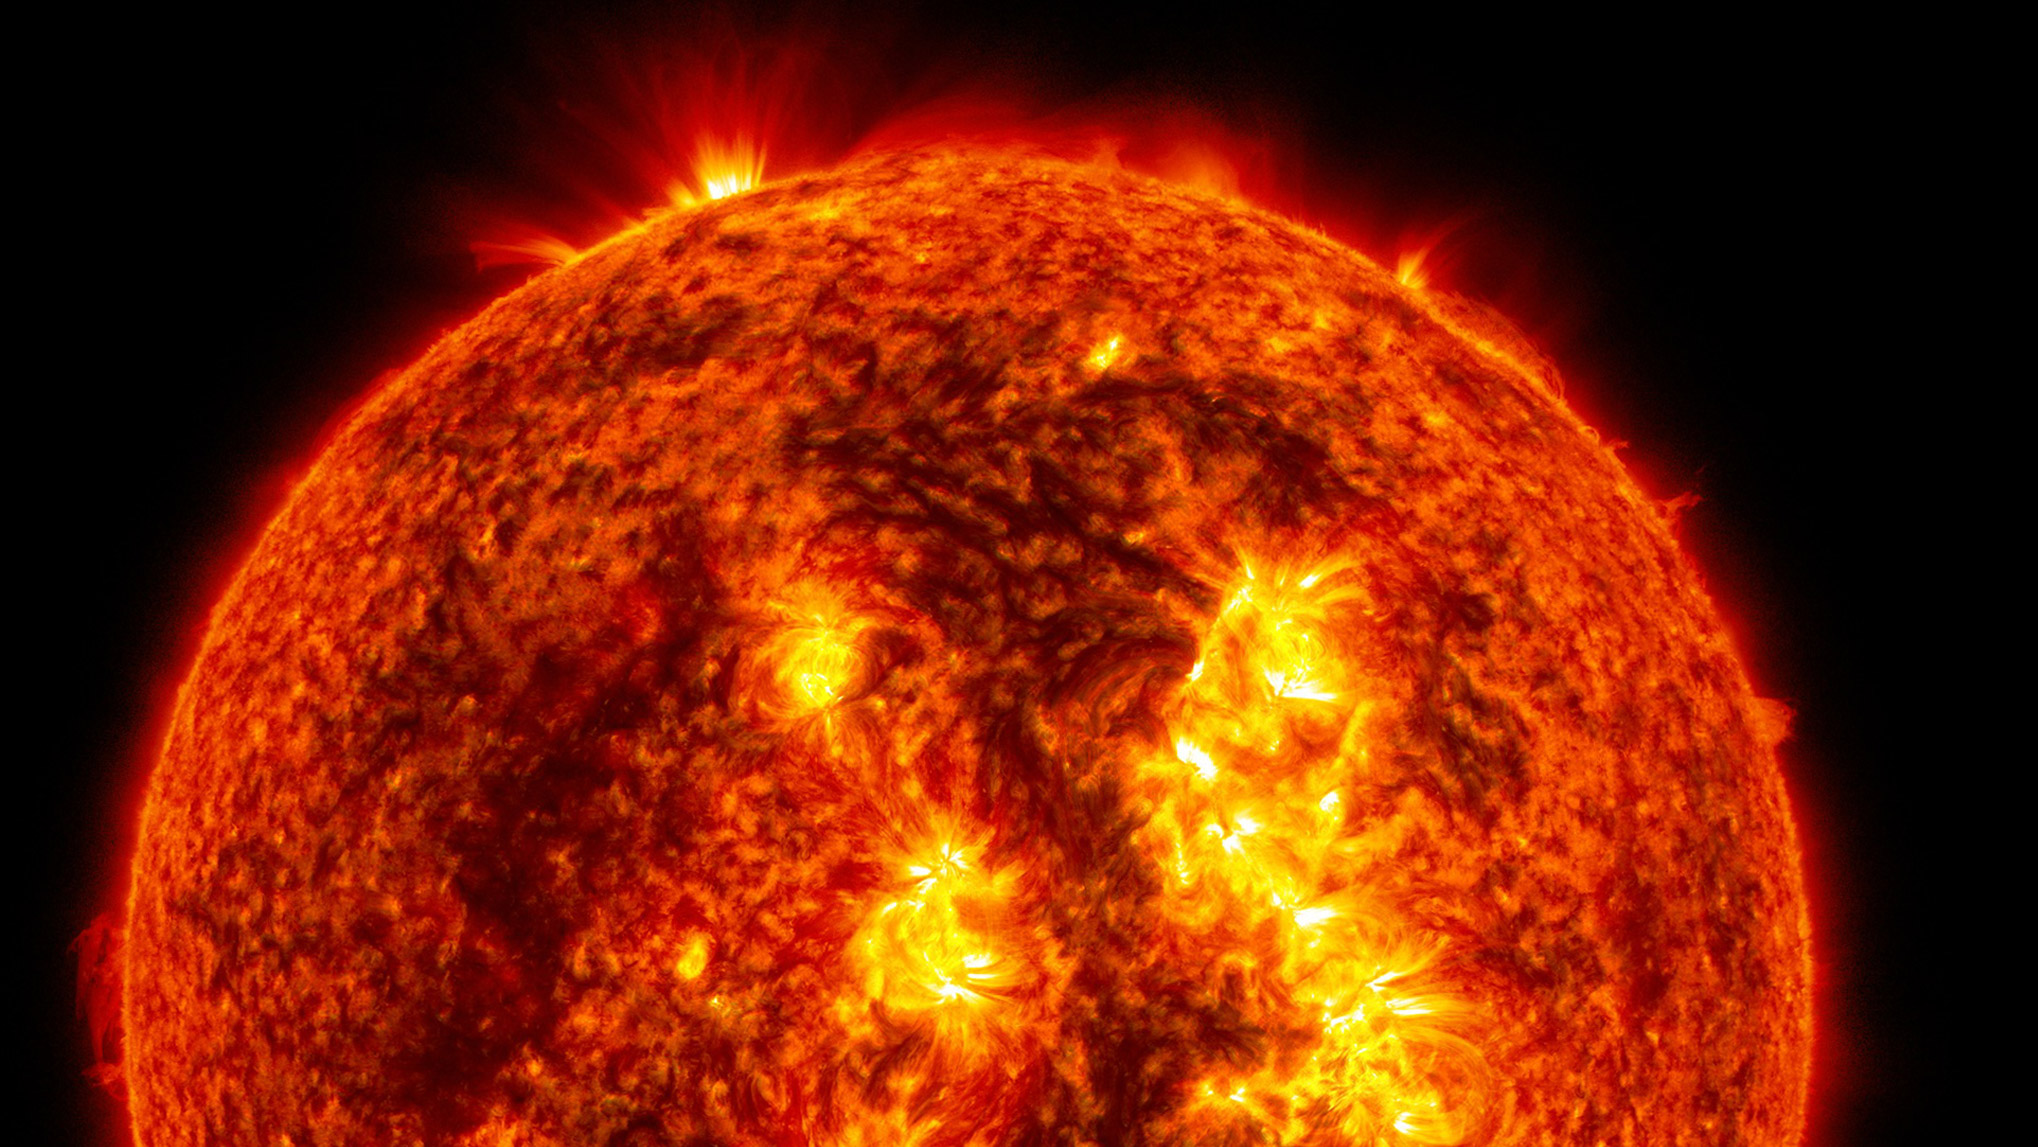 close-up of activity on the surface of the Sun